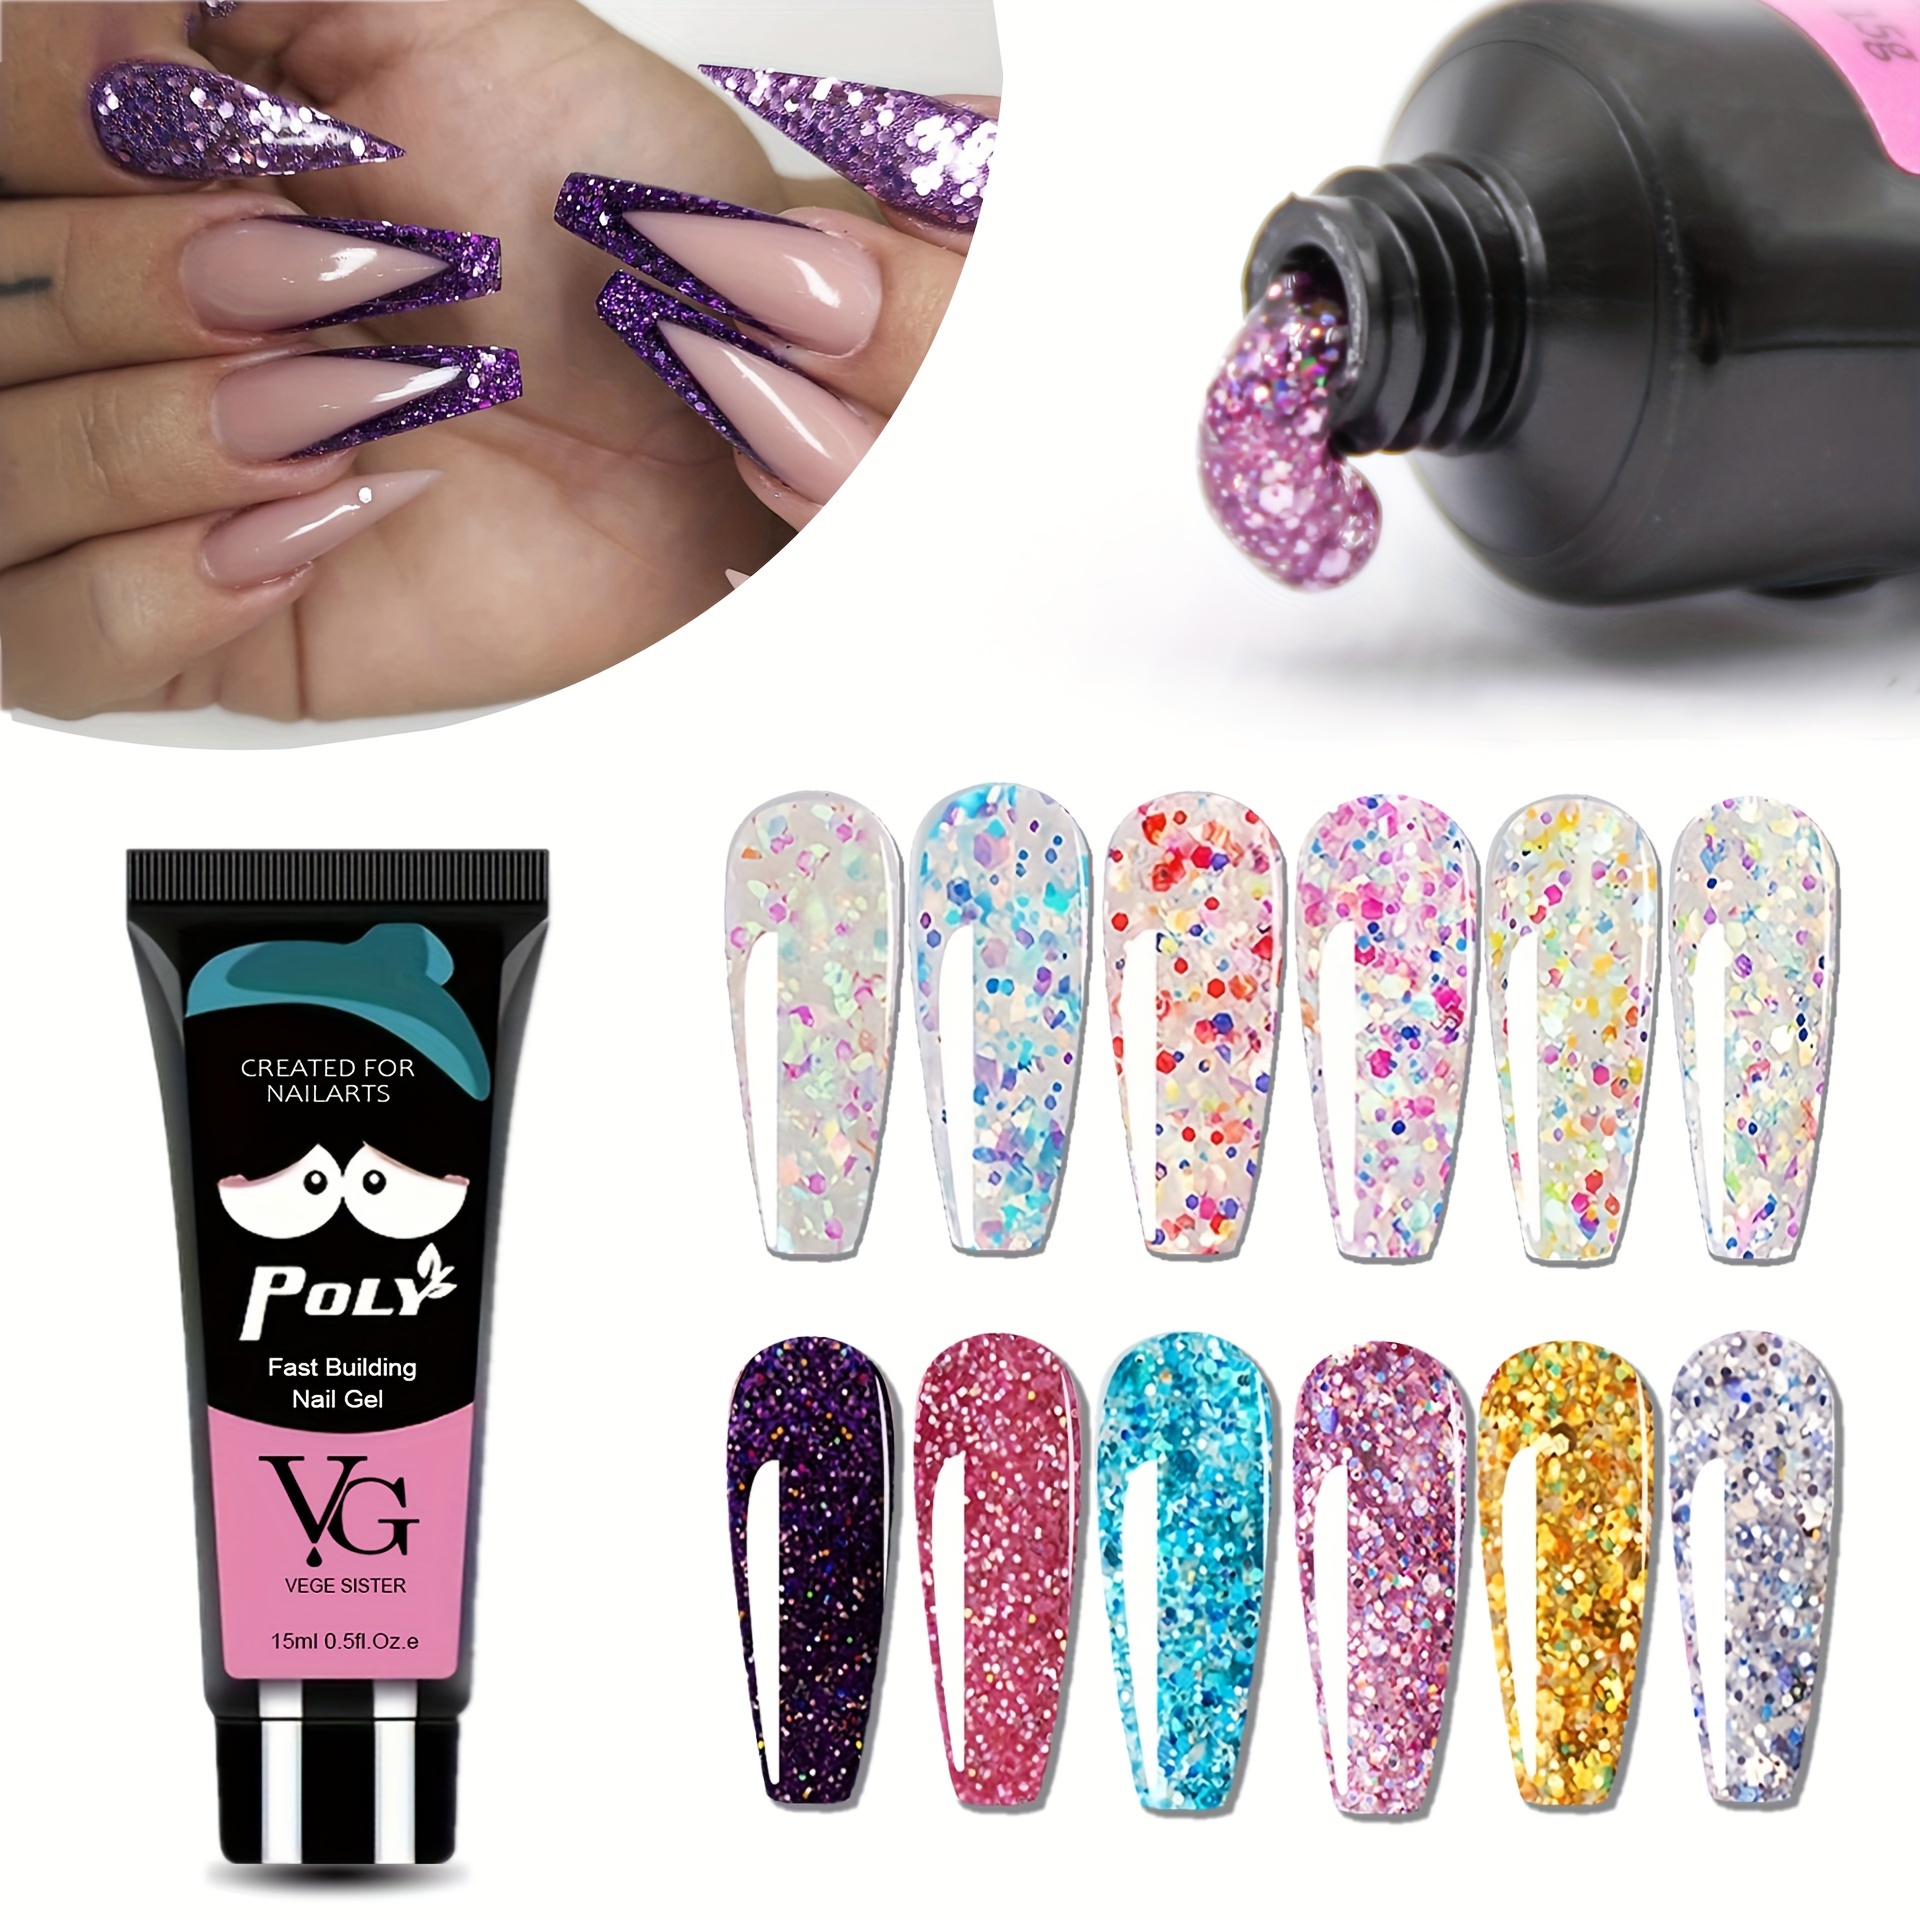 

Glitter Glossy Nail Gel, 15ml Fast Building Nail Extension Gel, Long Lasting Builder Gel Acrylic Nails, Suitable For All Seasons Nail Art, Home & Salon Use